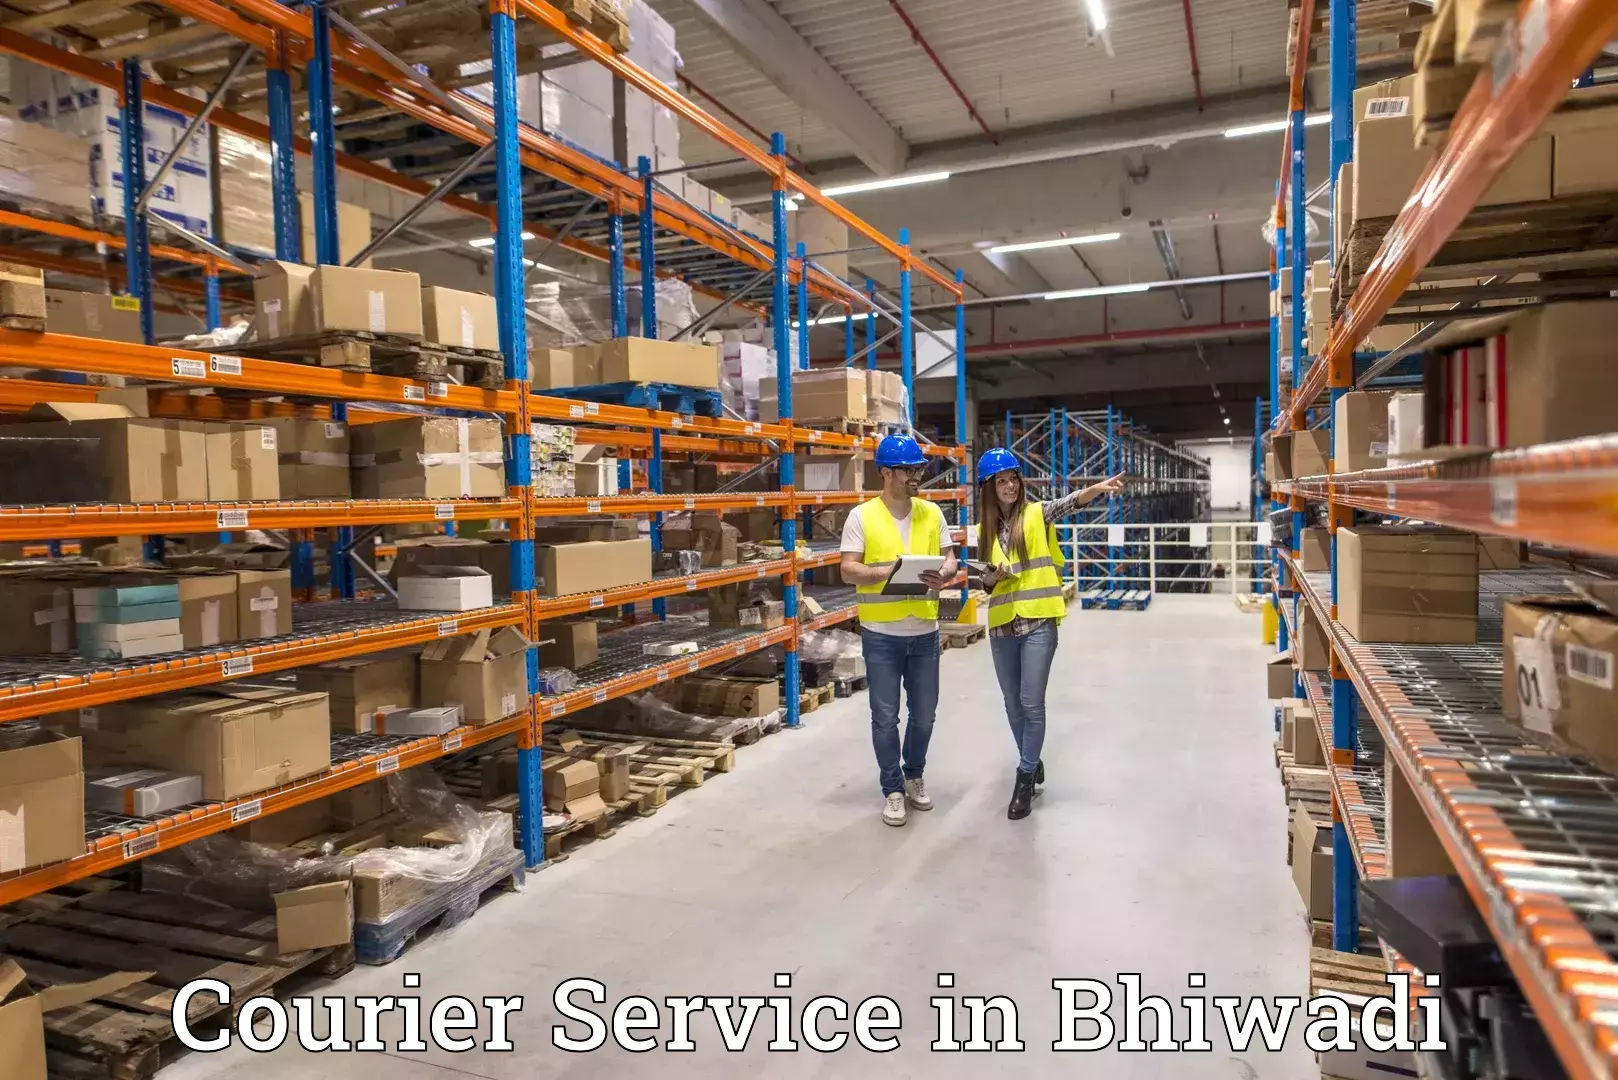 On-call courier service in Bhiwadi